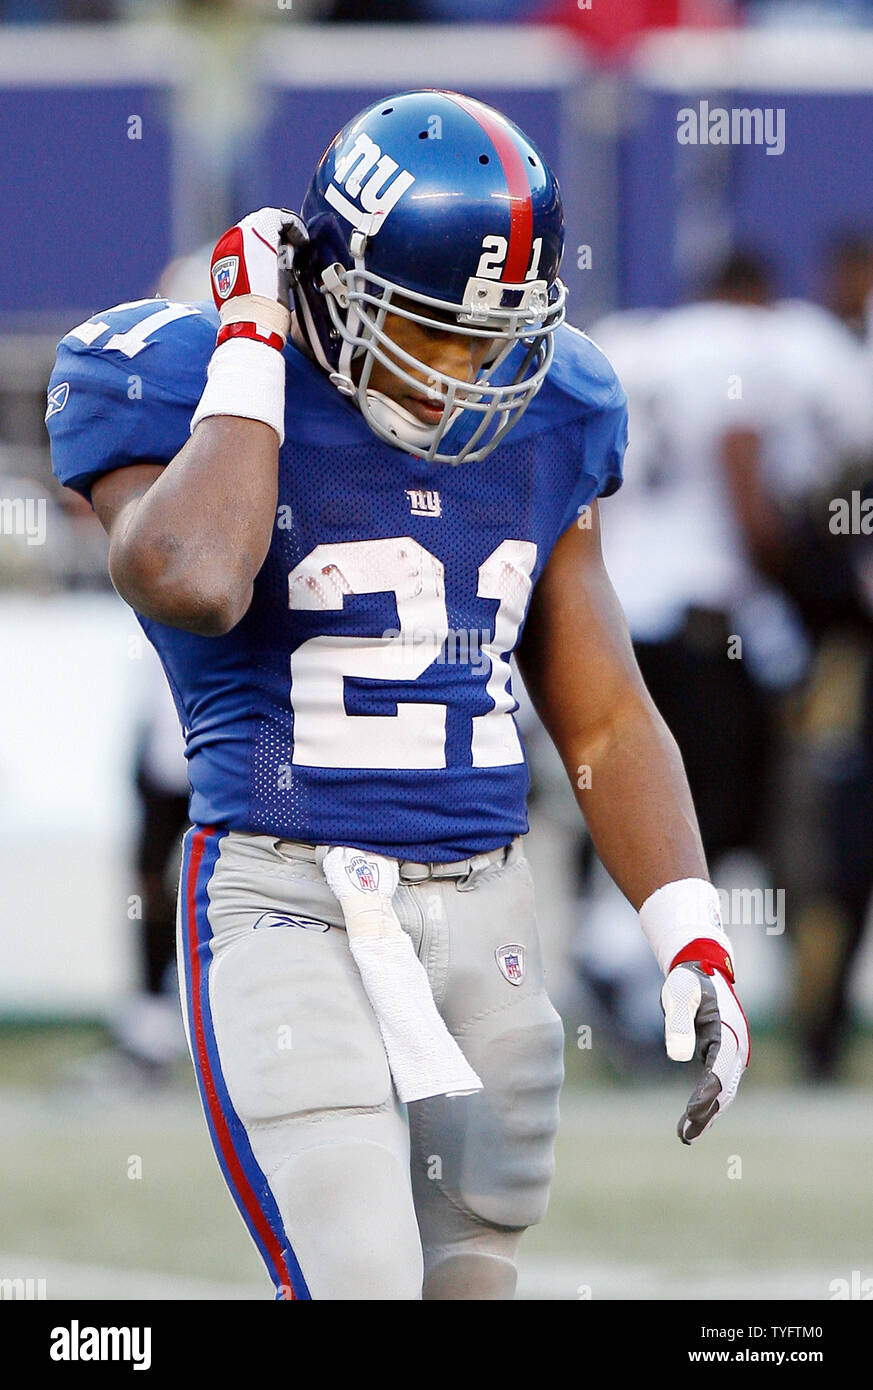 New York Giants Tiki Barber grabs his helmet as he walks off of the field  in the 4th quarter at Giants Stadium in East Rutherford, New Jersey on  December 24, 2006. The